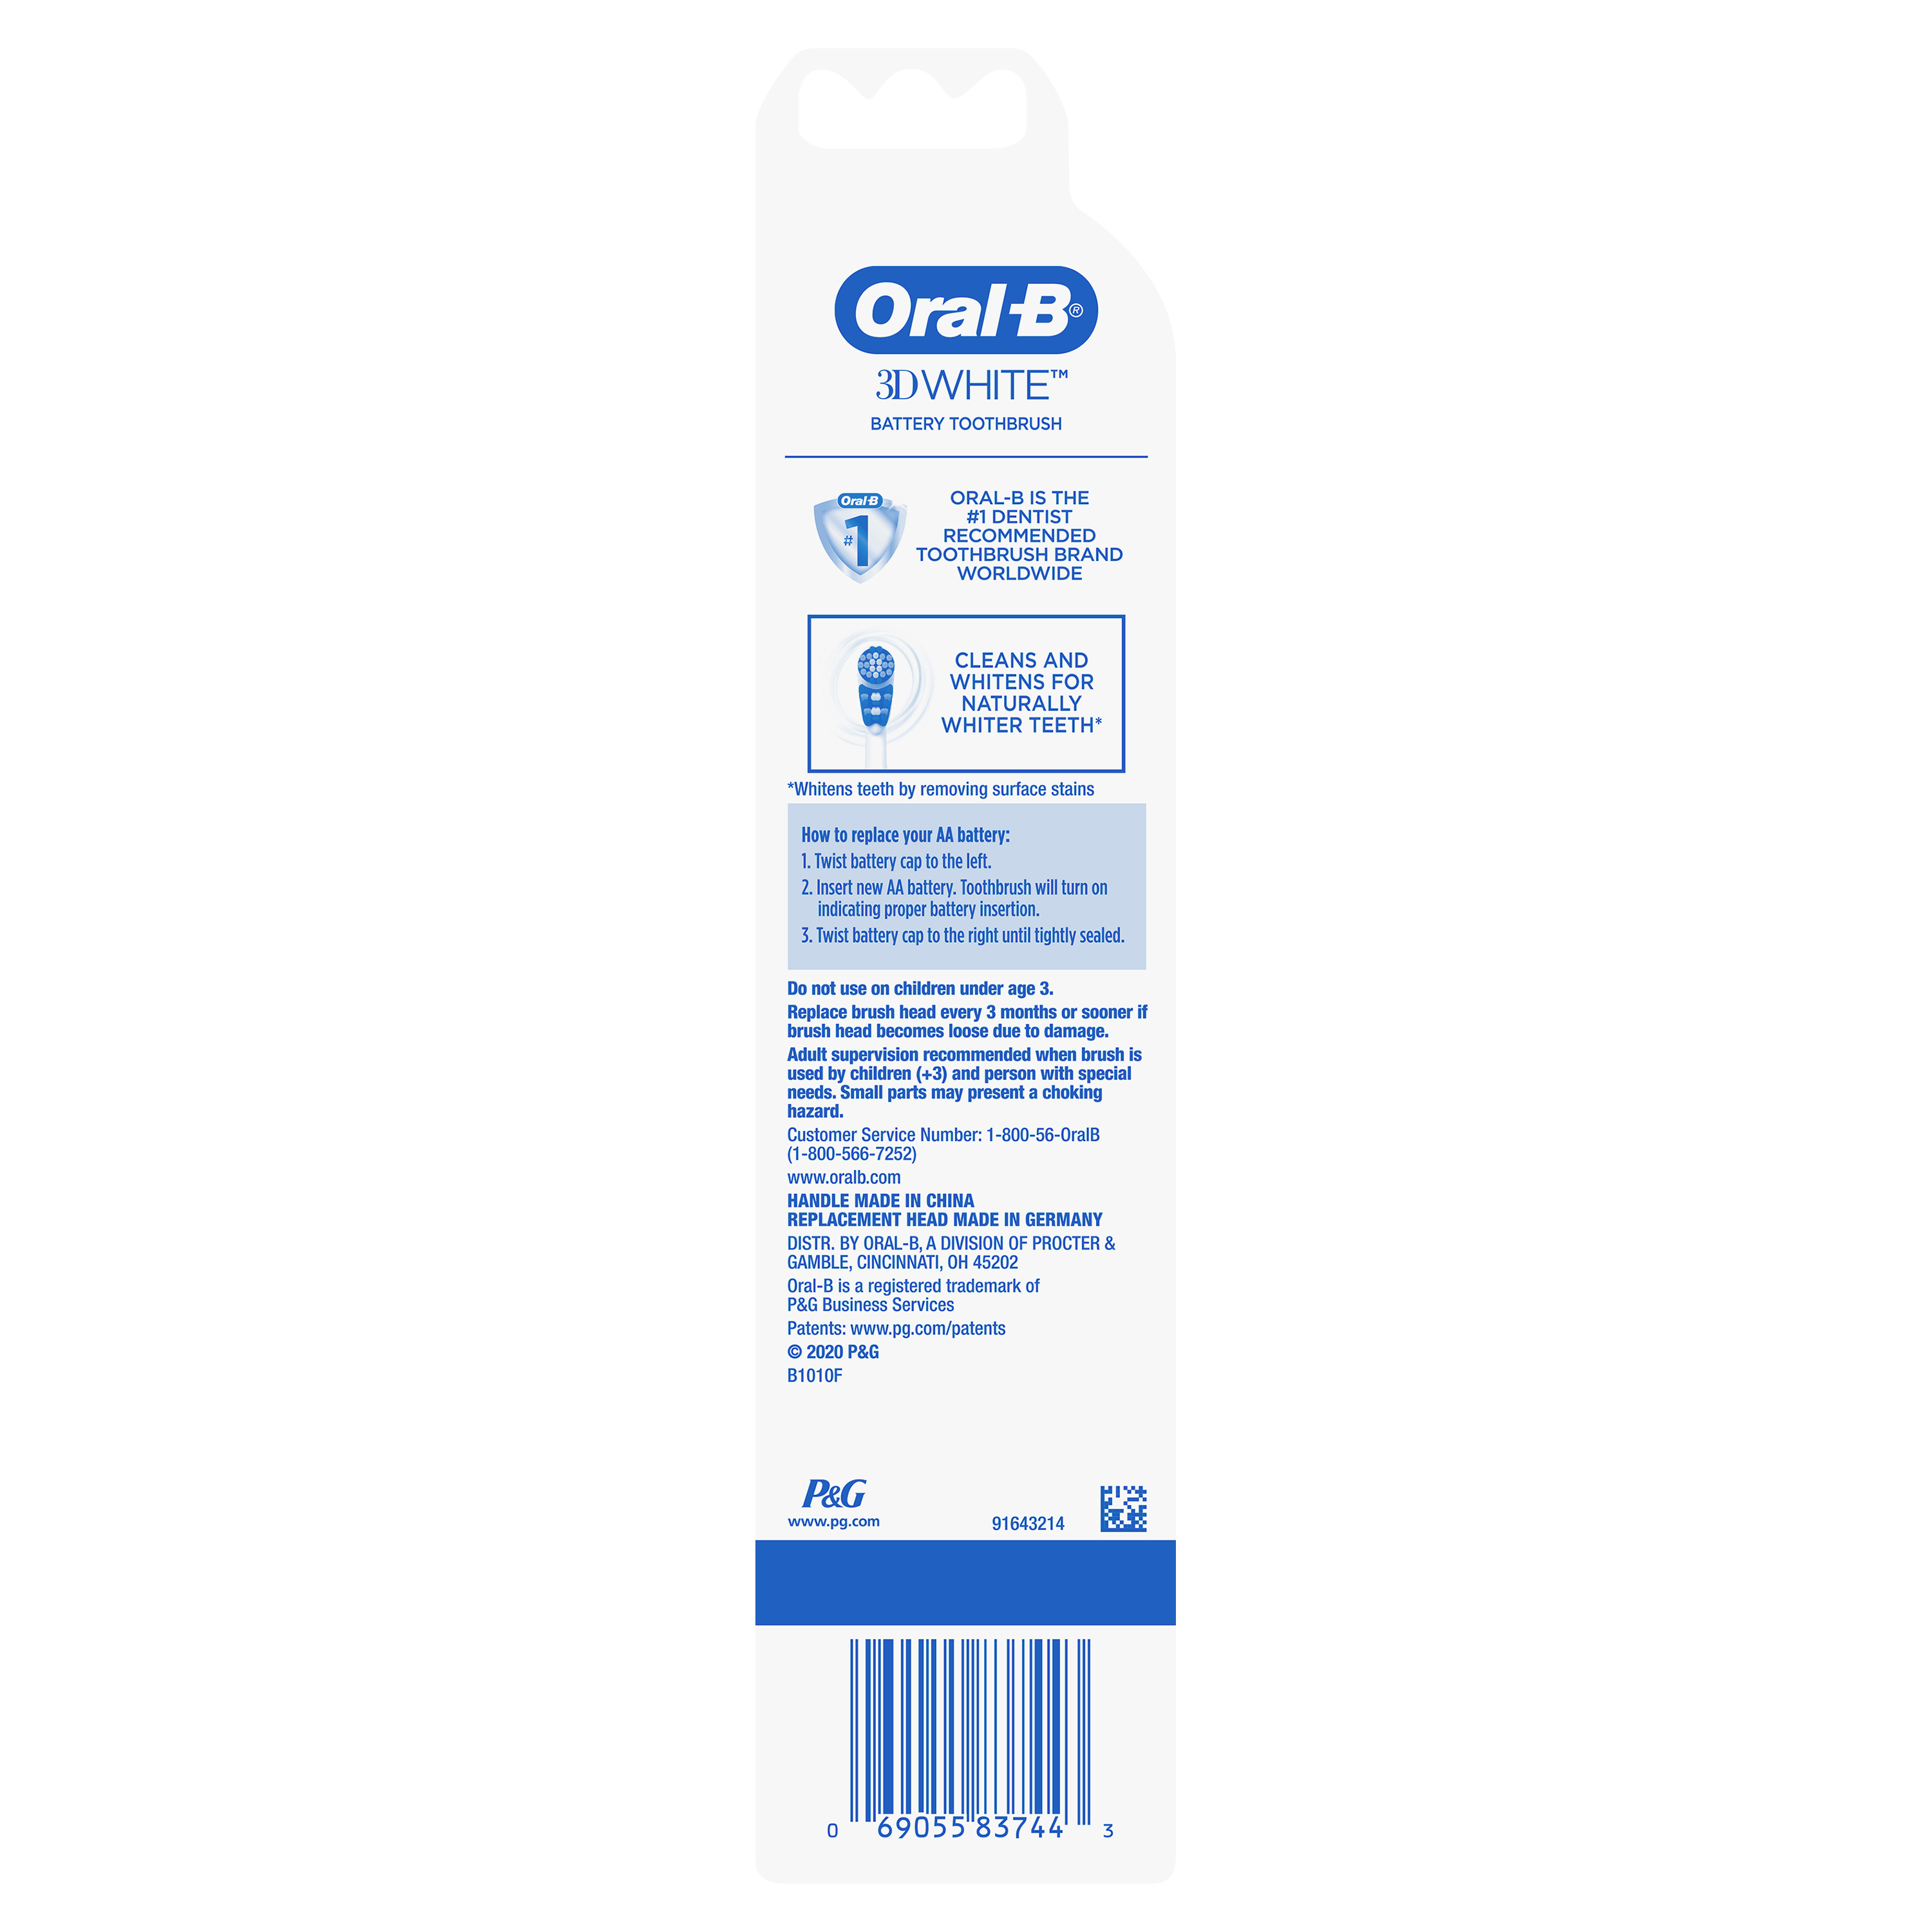 Oral-B 3D White Battery Toothbrush, 1 Count, Colors May Vary, for Adults and Children 3+ - image 3 of 9